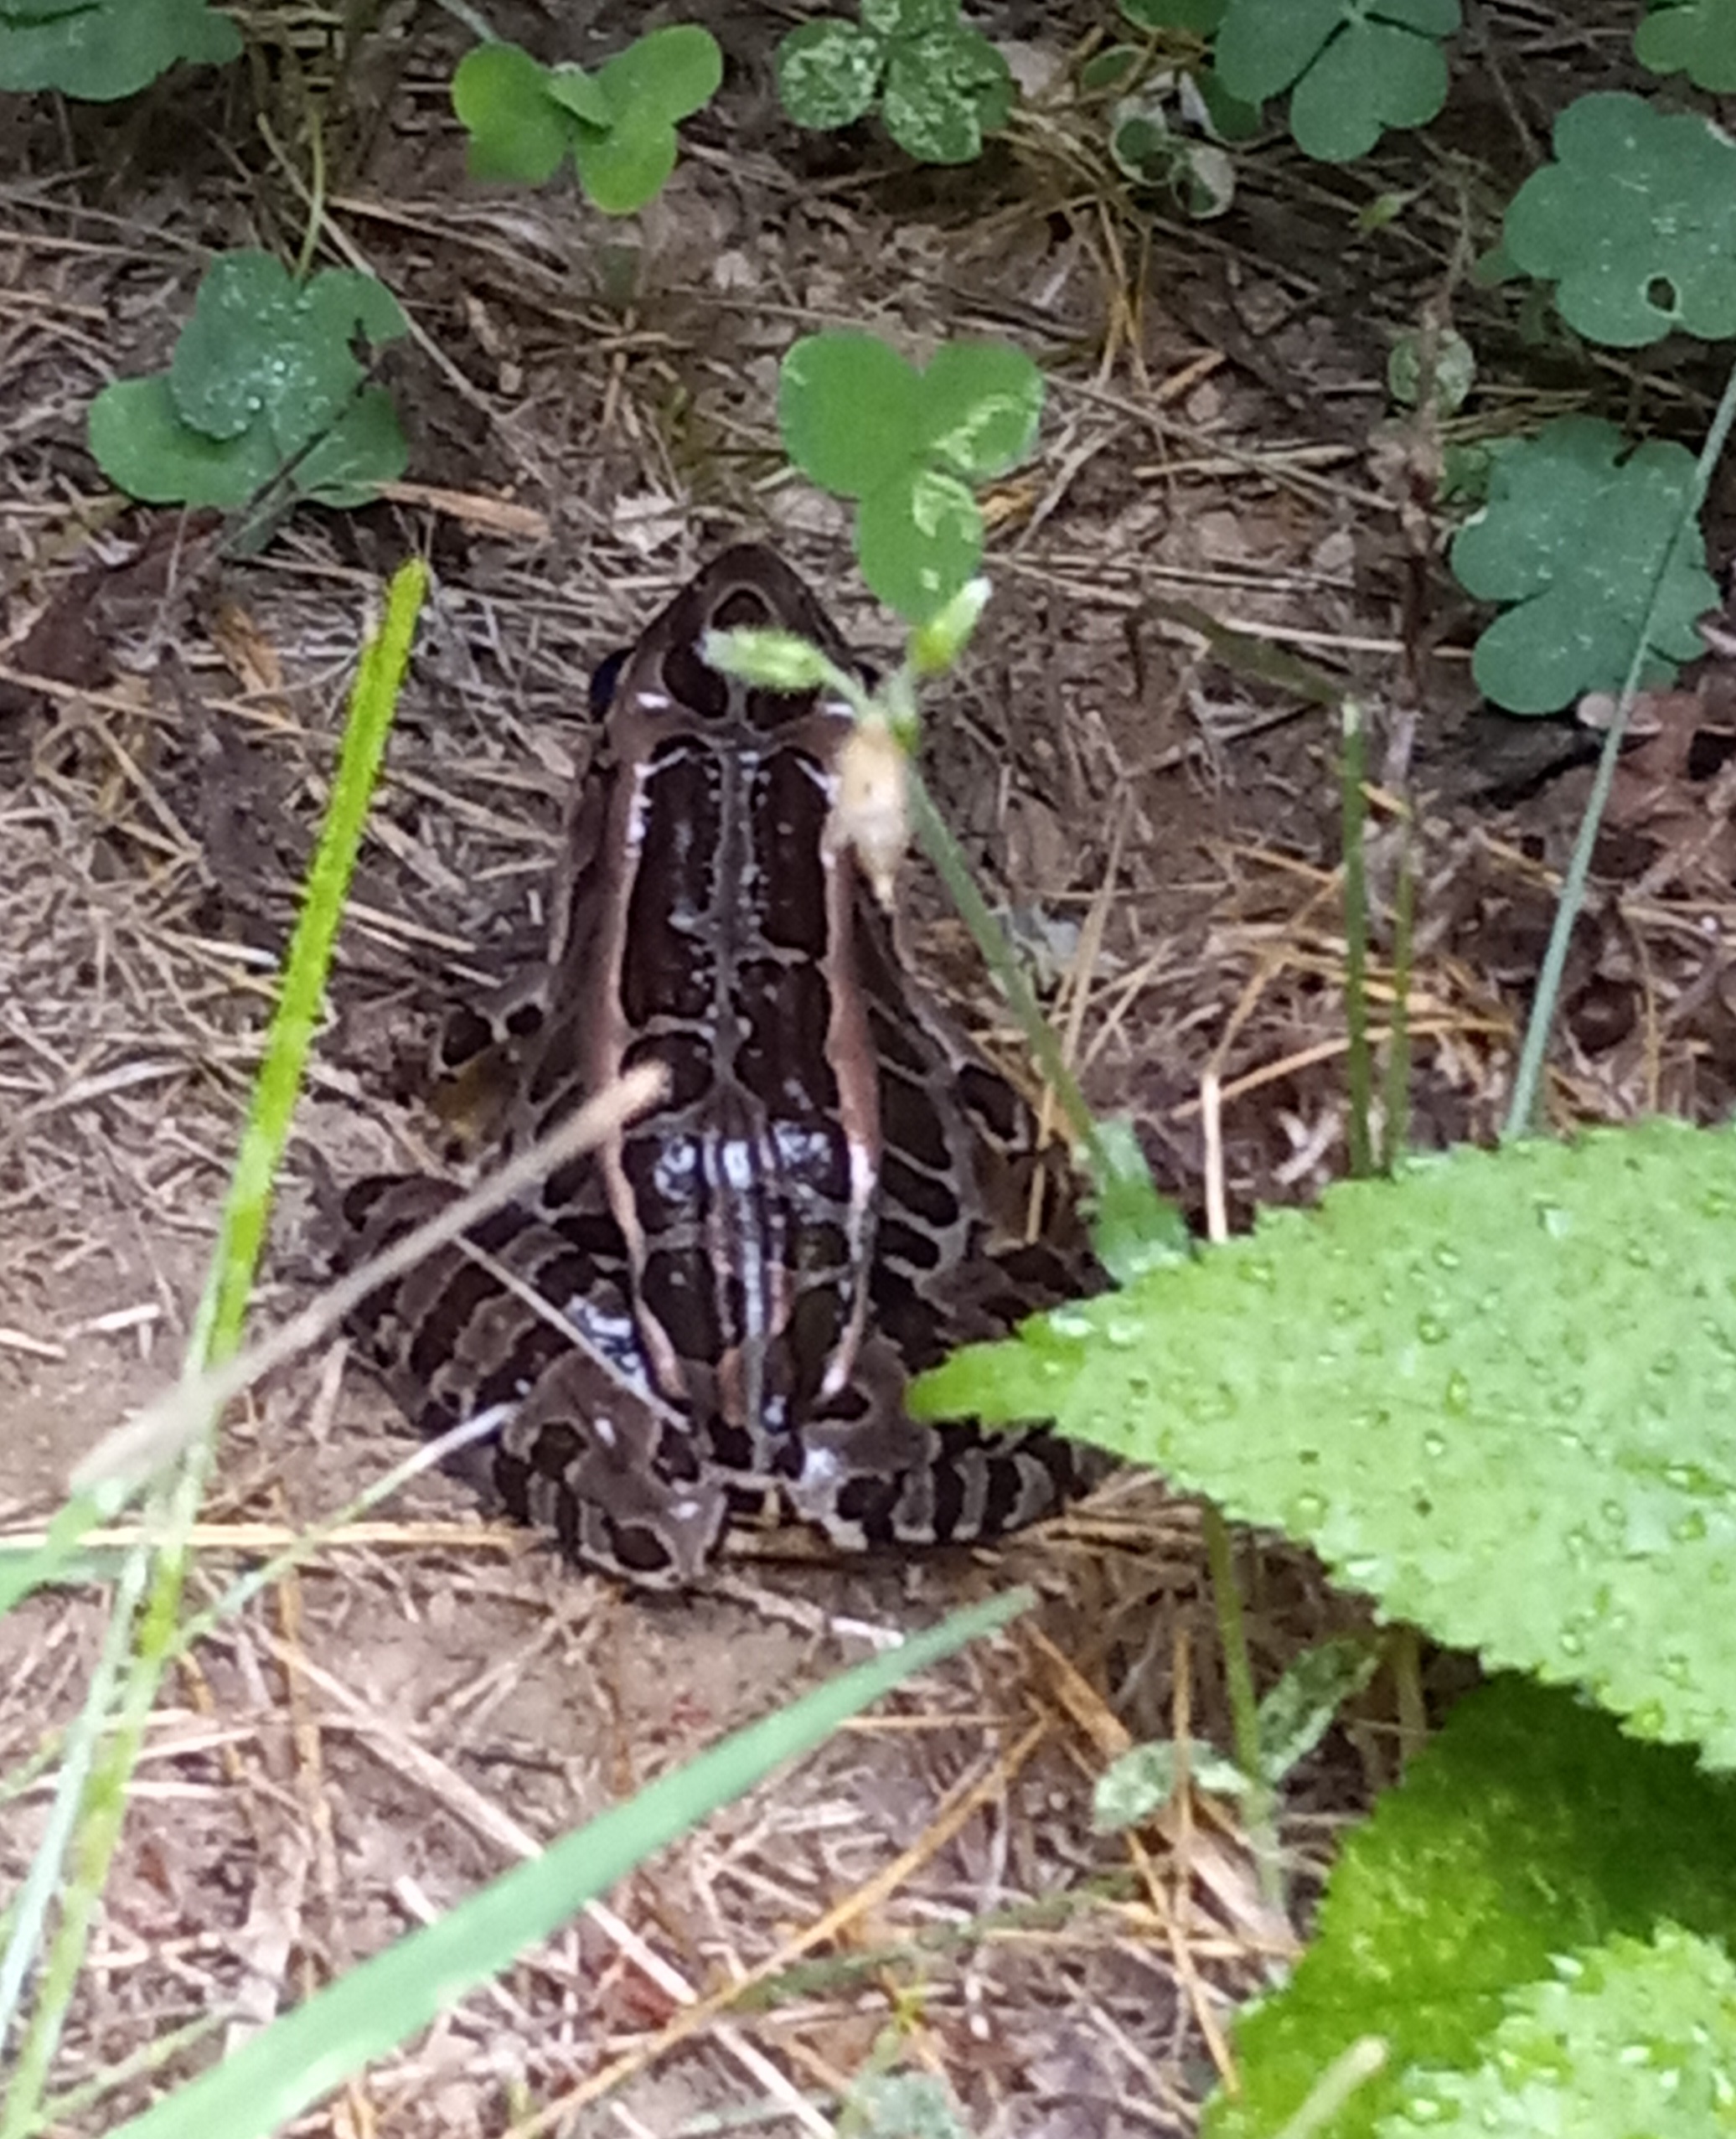 A dark brown and black frog sitting on the ground, surrounded by several green plants